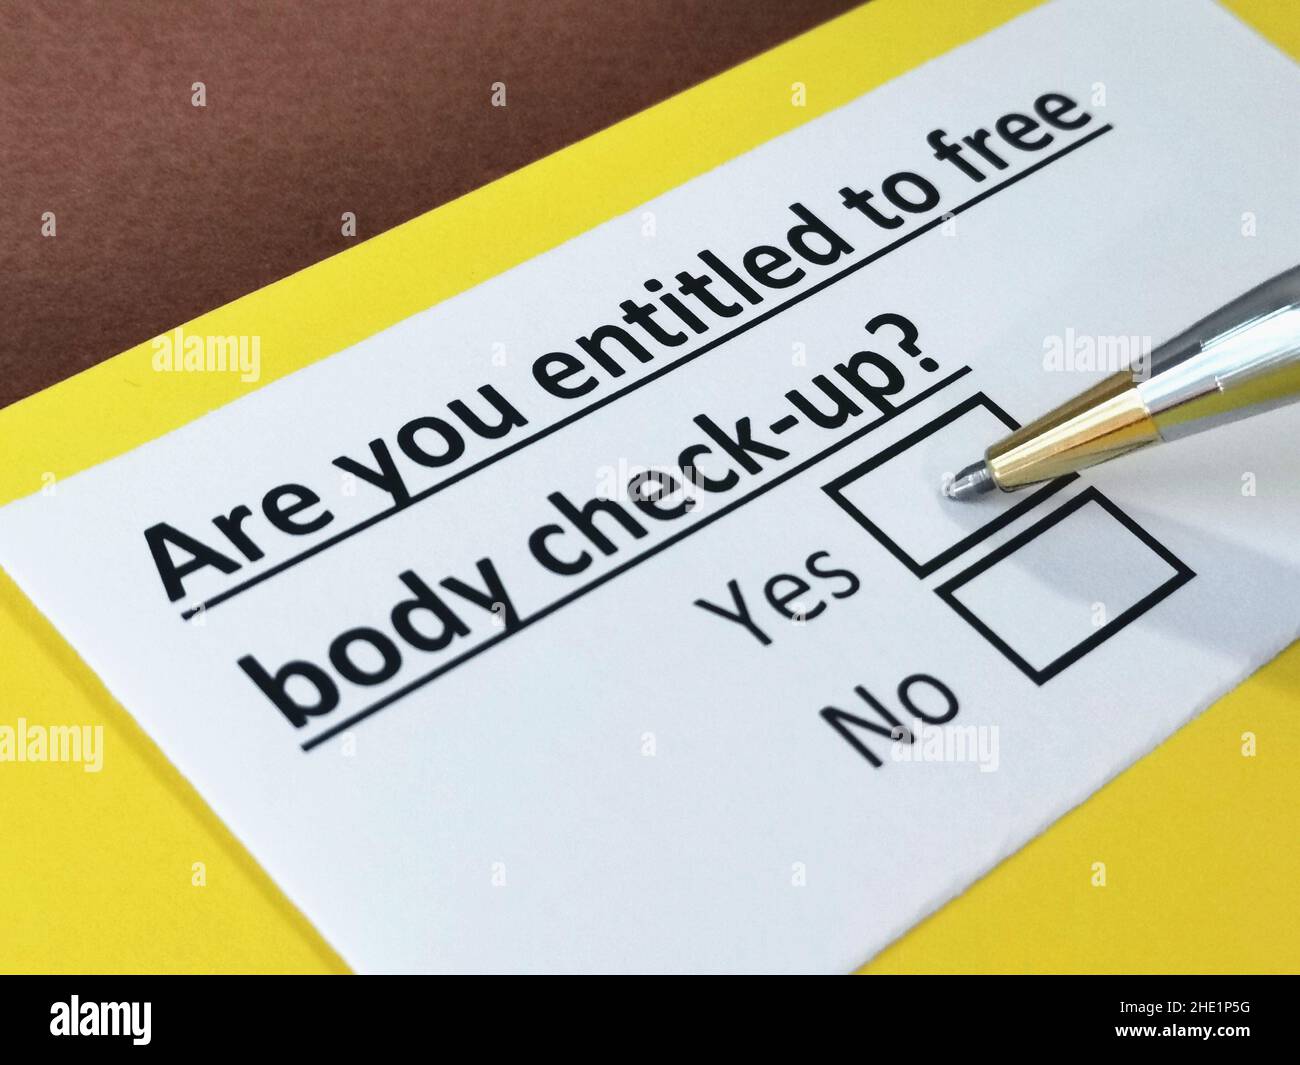 One person is answering question about free body check up. Stock Photo